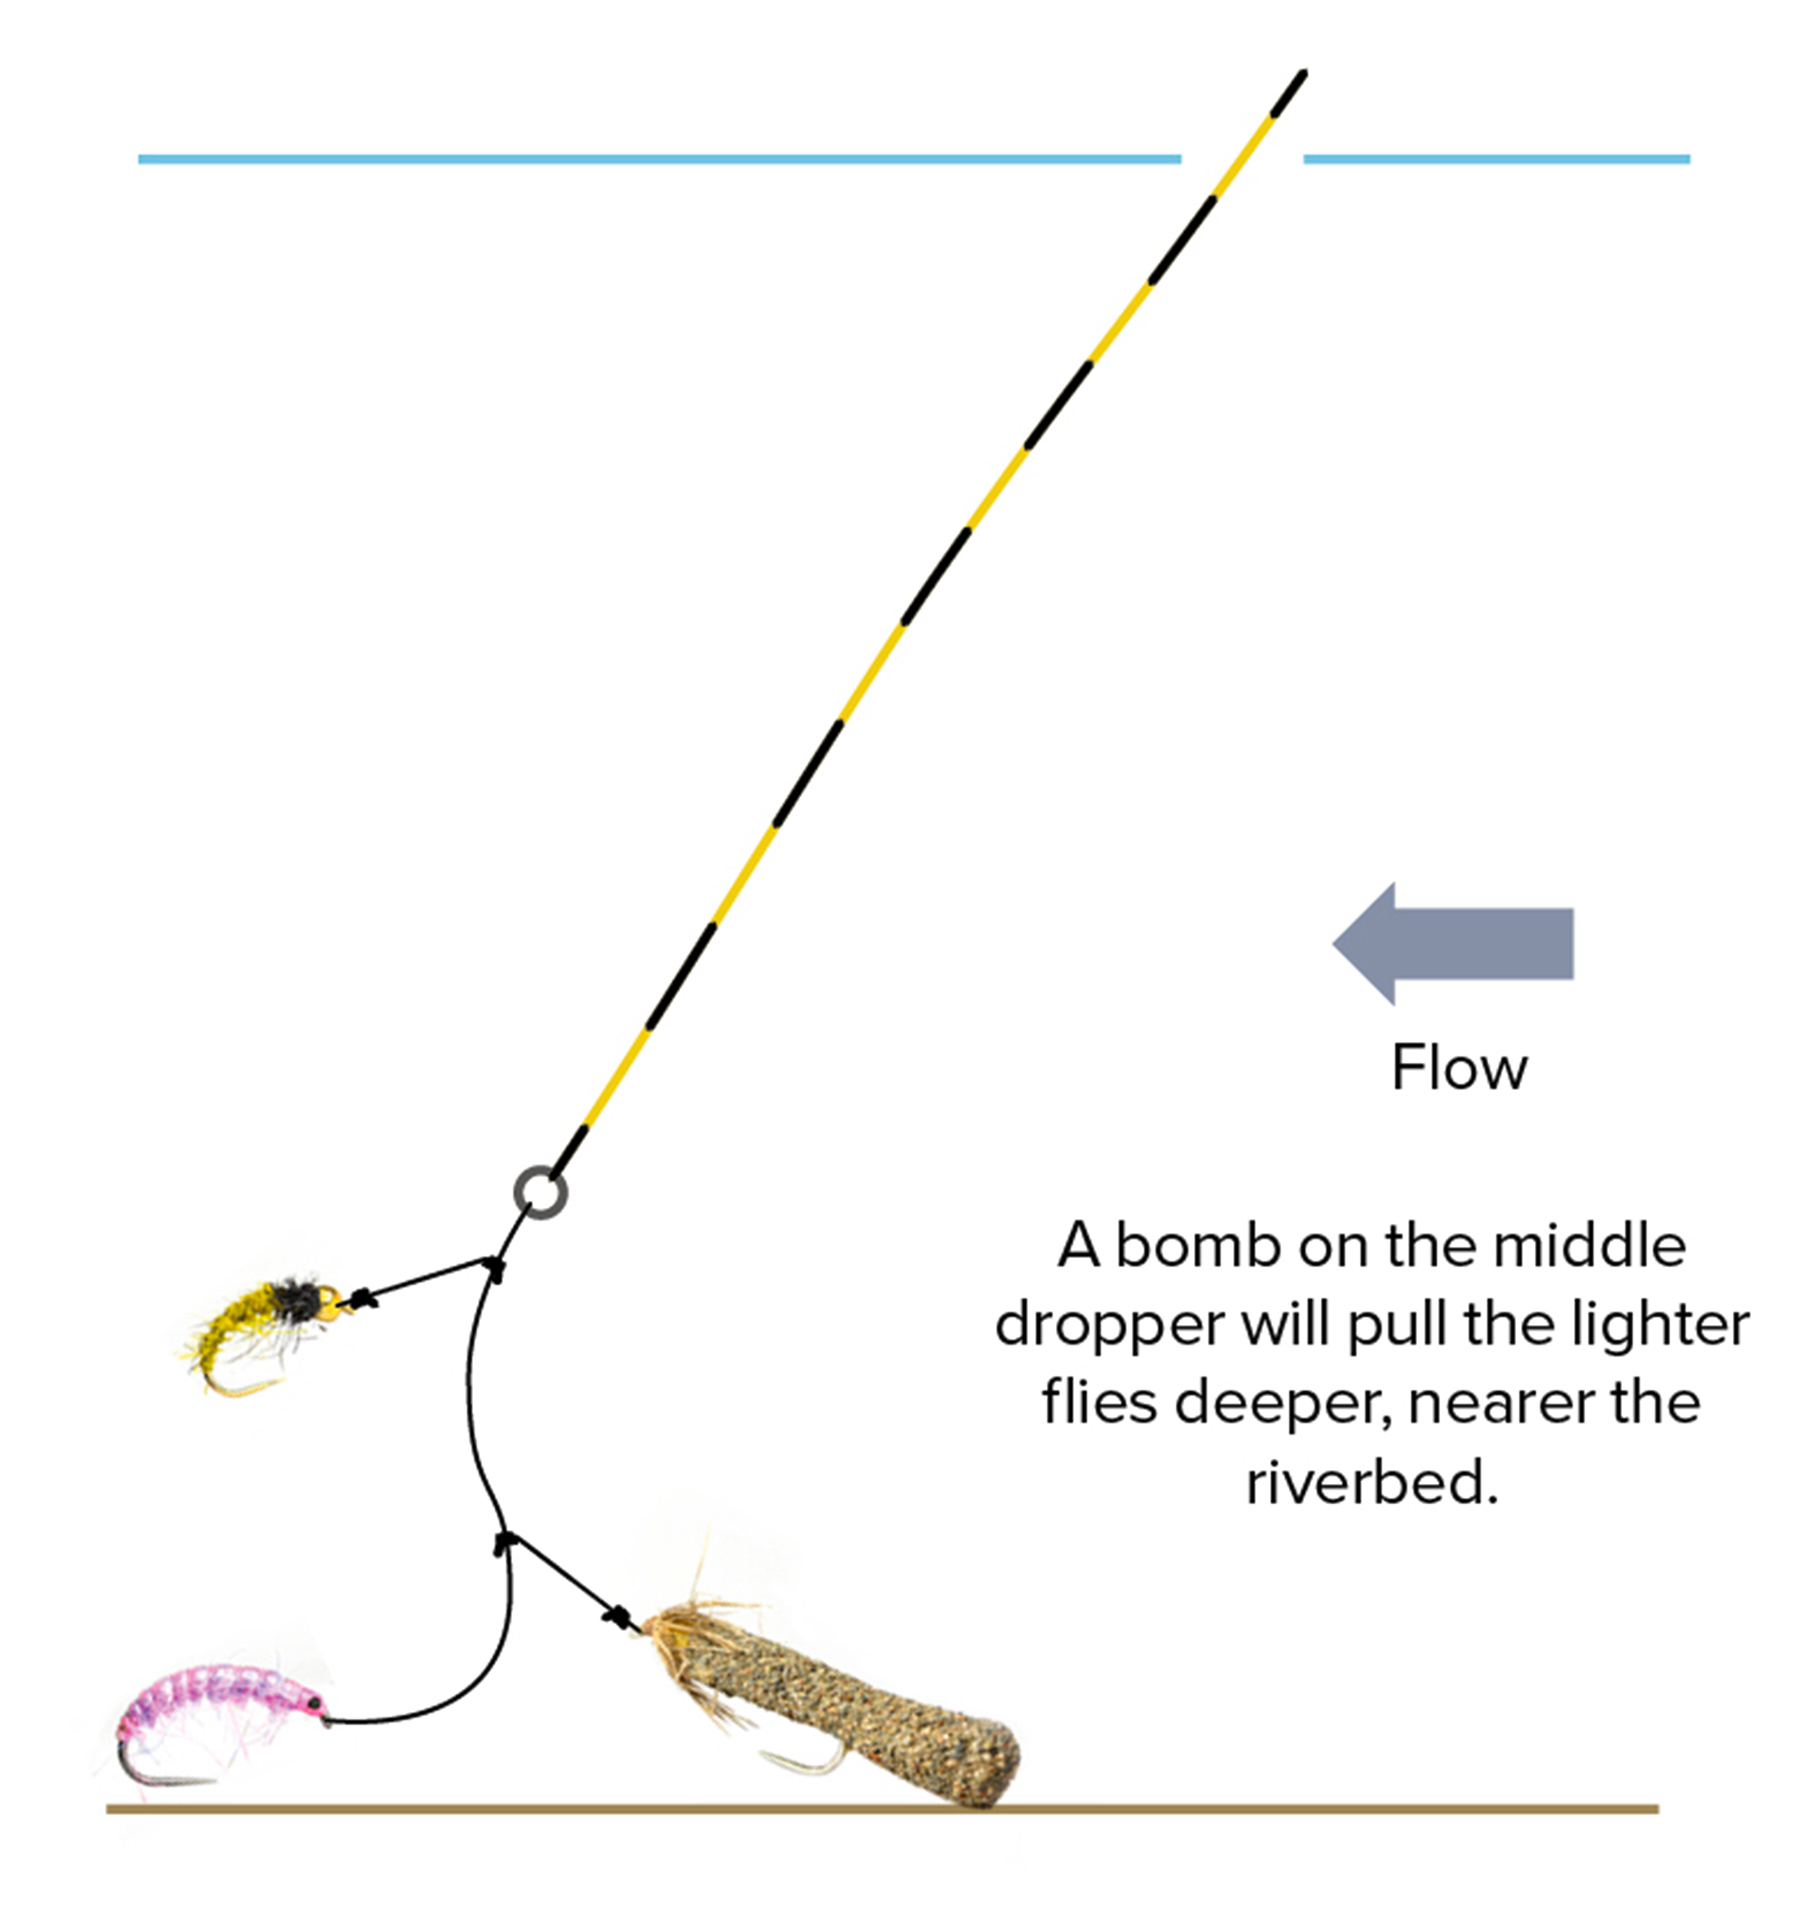 Diagram 3: Bomb on the middle dropper